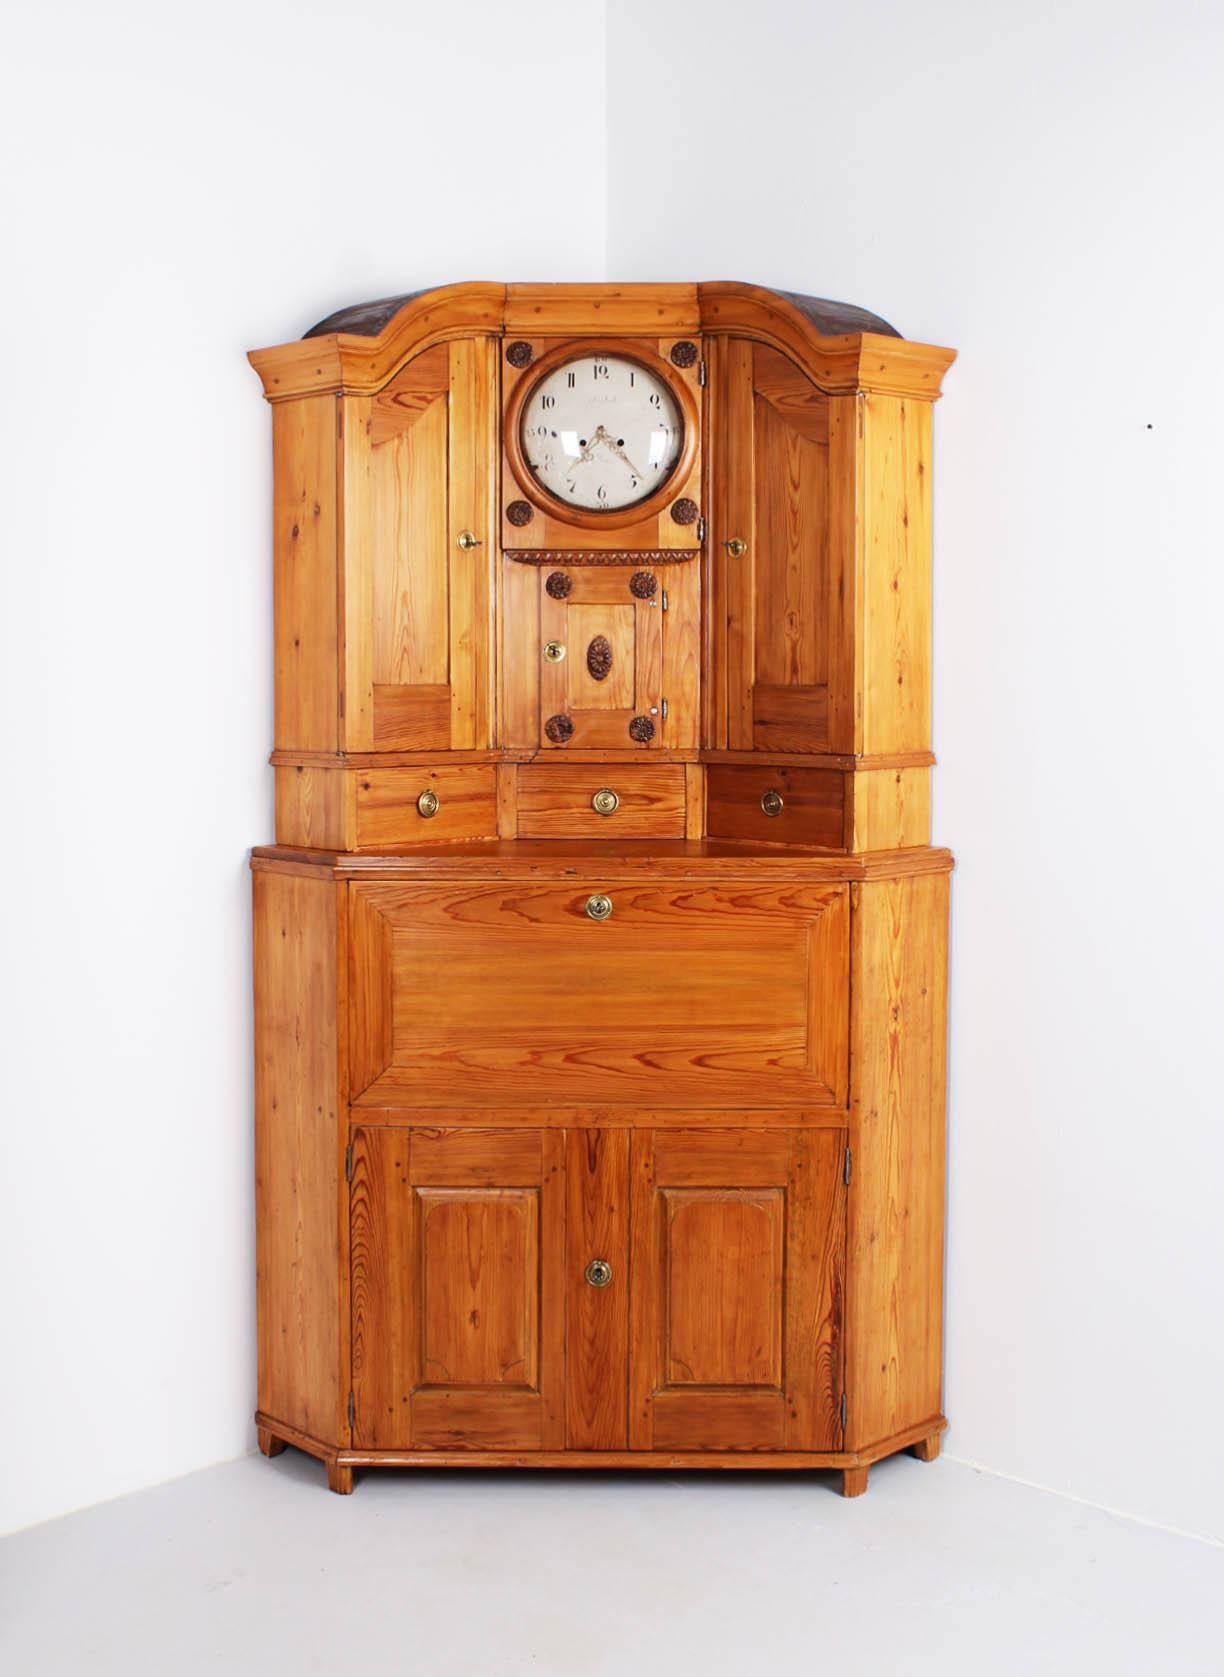 Antique corner cabinet with built-in grandfather clock

Sweden
Pine
Classicism around 1800

Dimensions: height: 220 cm 

Description:
Quite extraordinary corner cupboard with secretary compartment and built-in Mora grandfather